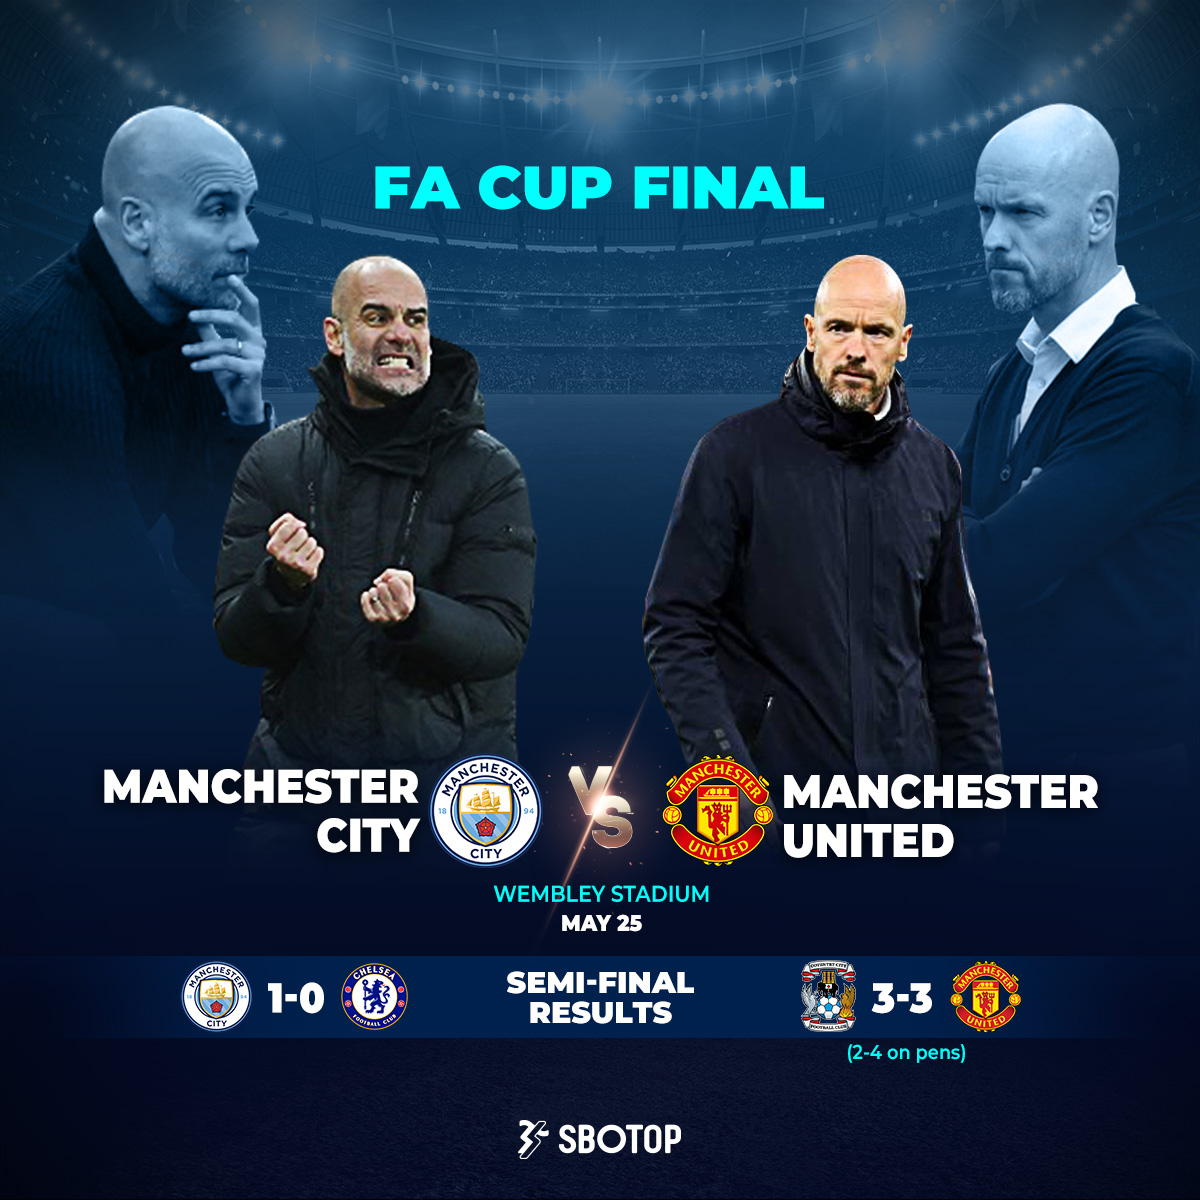 Manchester United booked their #FACup final spot after a dramatic penalty shootout against Coventry.

Can the Red Devils avenge themselves against Manchester City for last year's final defeat? #ManchesterDerby